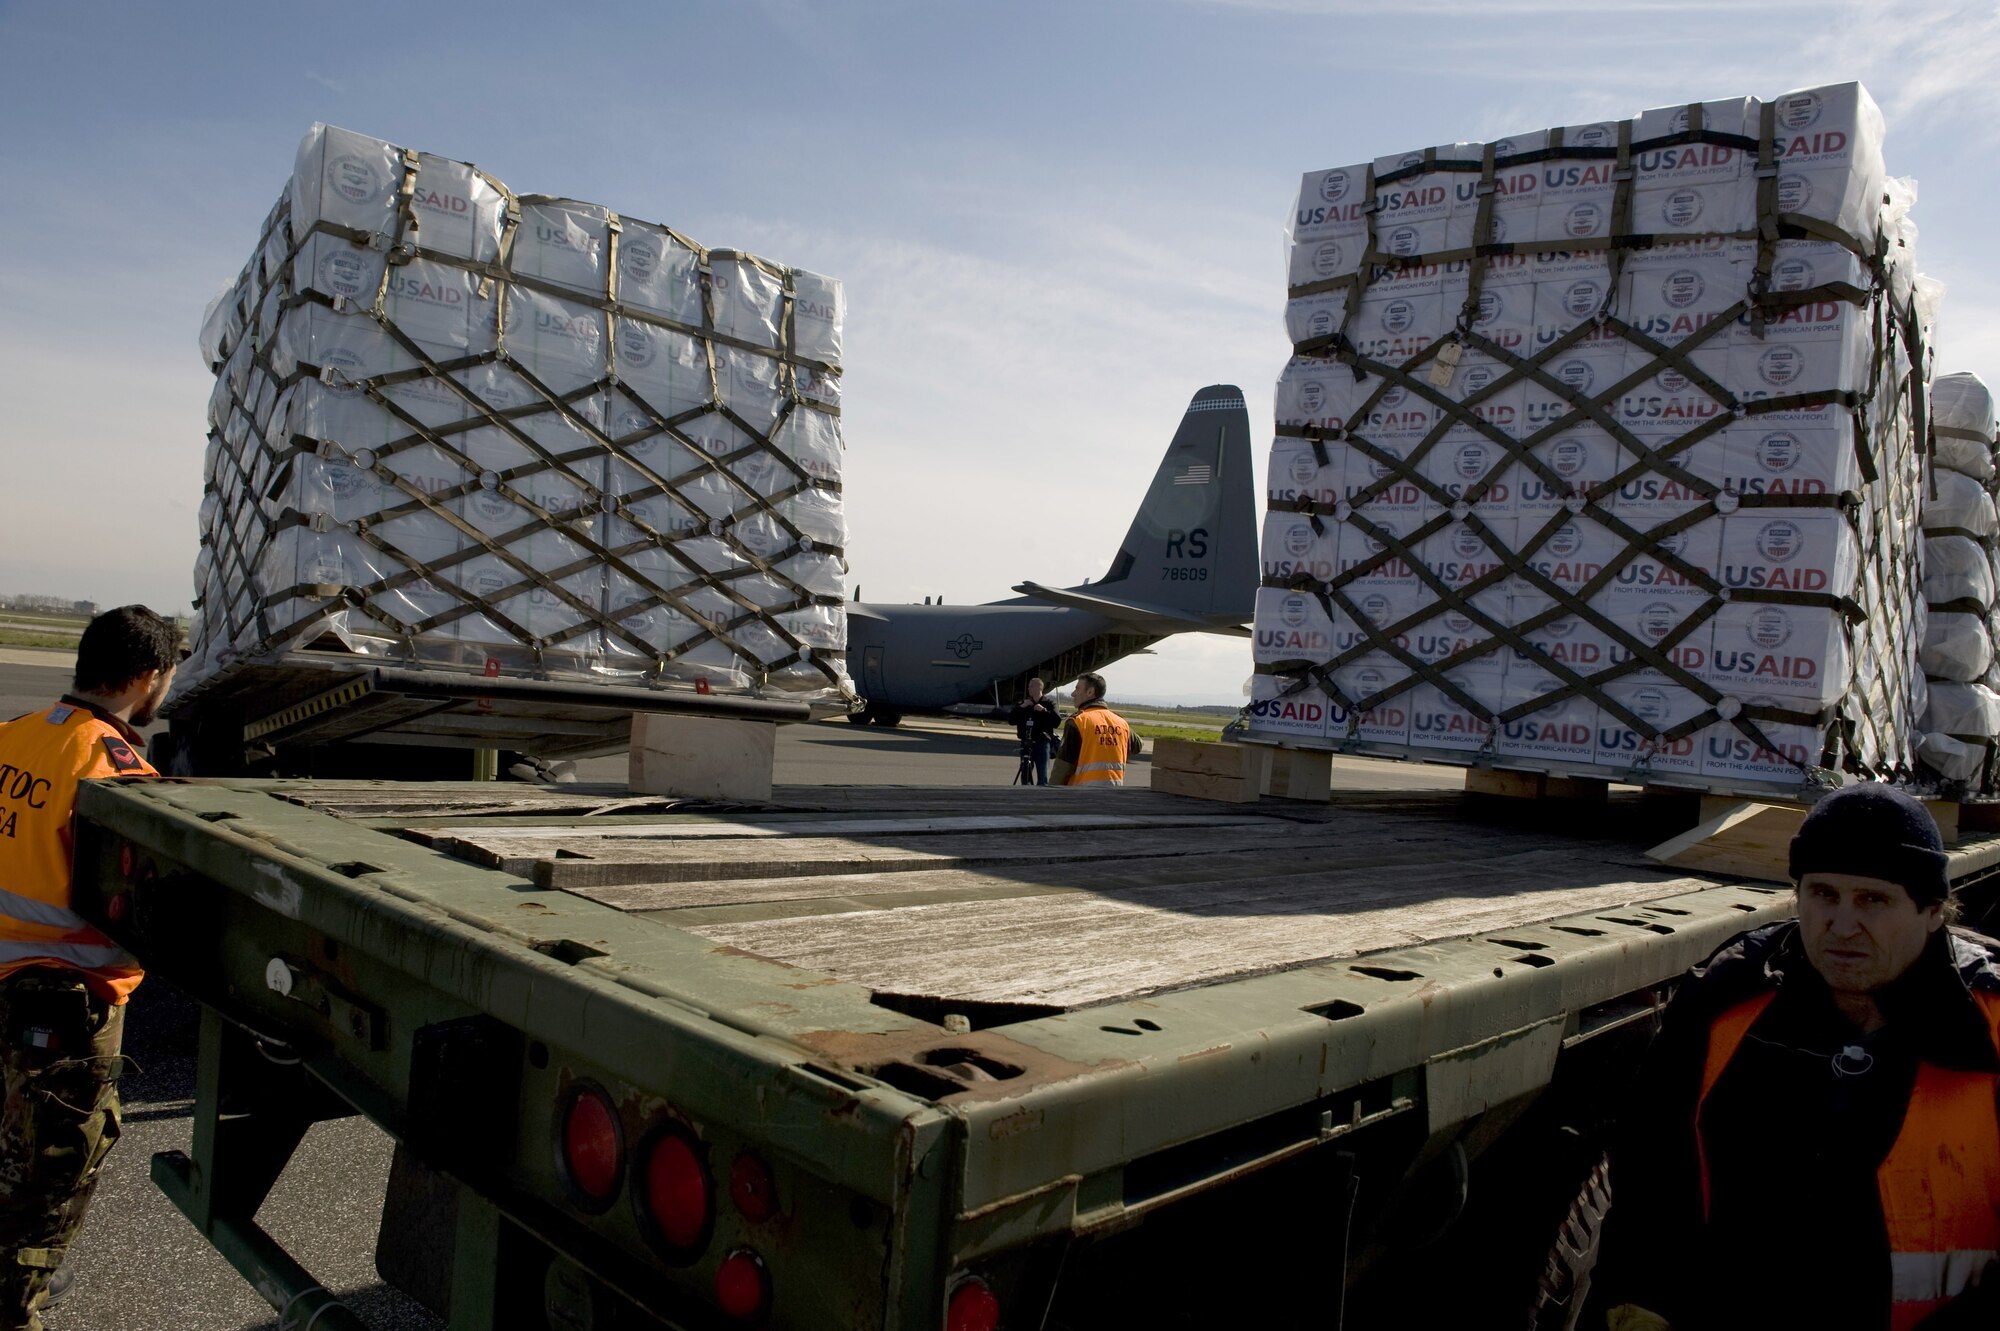 U.S. Airmen from the 435th Air Mobility Squadron, from Ramstein Air Base, picked up blankets, tarps and water containers from the U.S. Agency for International Development to load onto C-130 aircraft in Pisa, Italy. The Air Force will fly the supplies to Tunisia as part of the U.S. government's work with the international community to meet the humanitarian needs of the Lybian people and others in the country who fled across the borders during political unrest. (U.S. Army photo by Staff Sgt. Brendan Stephens)  
